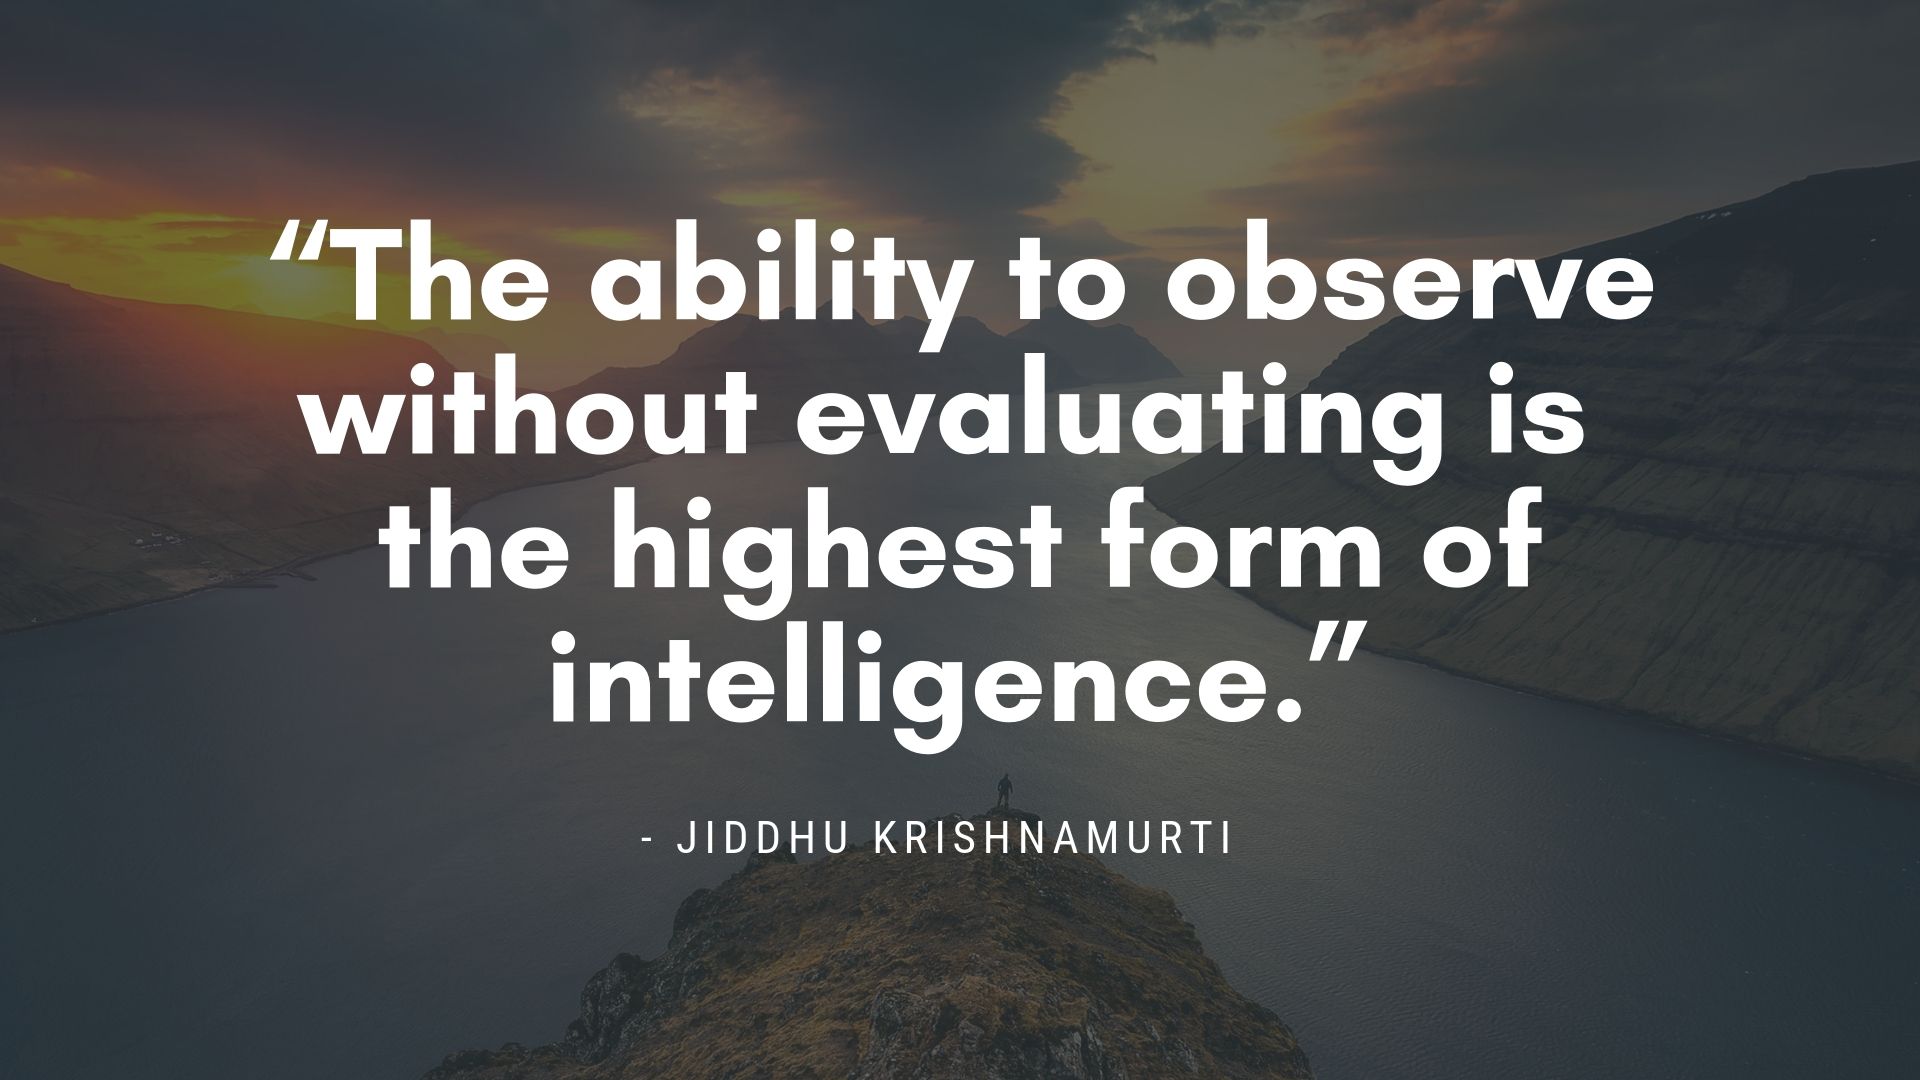 The ability to observe without evaluation is the highest form of intelligence. - Krishnamurti